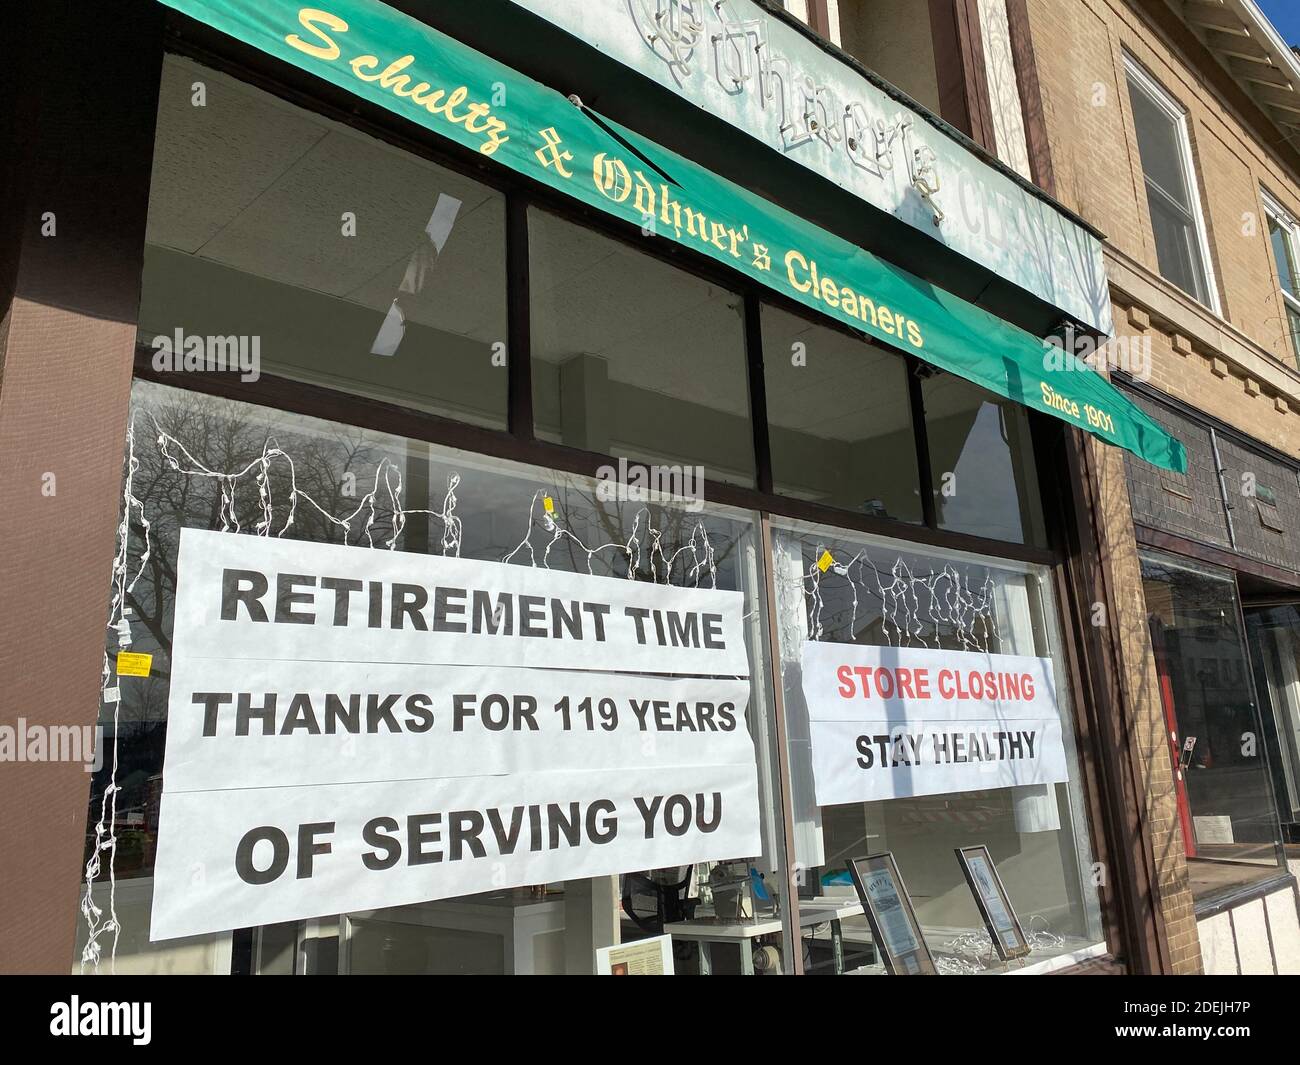 Schultz & Odhner's Dry Cleaners going out of business after 119 years - another business casualty of the pandemic. Stock Photo